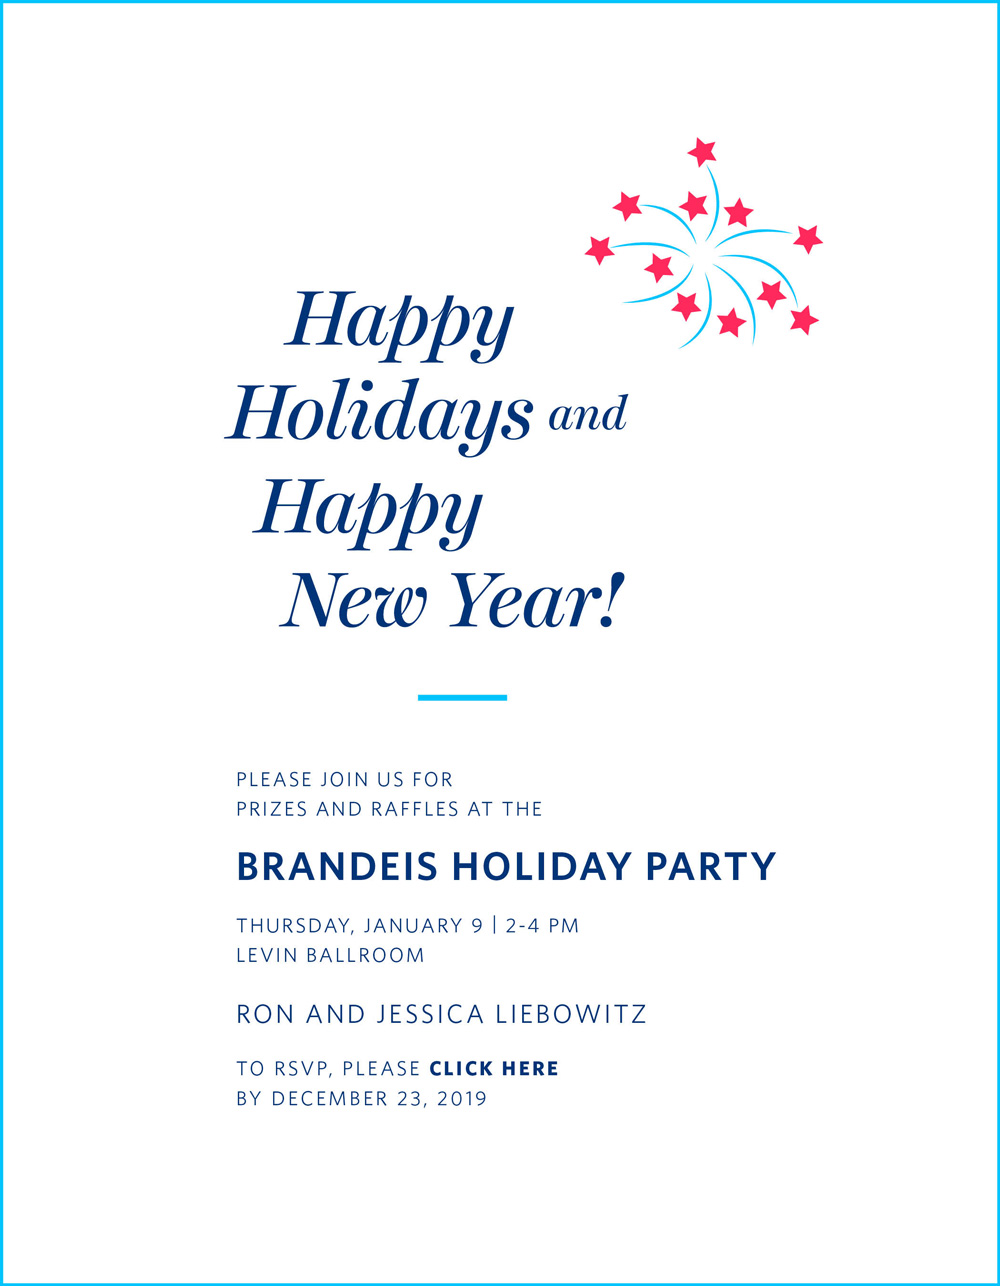 Happy Holidays and Happy New Year! Please join us for prizes and raffles at the Brandeis Holiday Party. Thursday, January 9, 2020, 2 until 4 PM, Levin Ballroom. Ron and Jessica Liebowitz. To RSVP, please click here by December 23, 2019